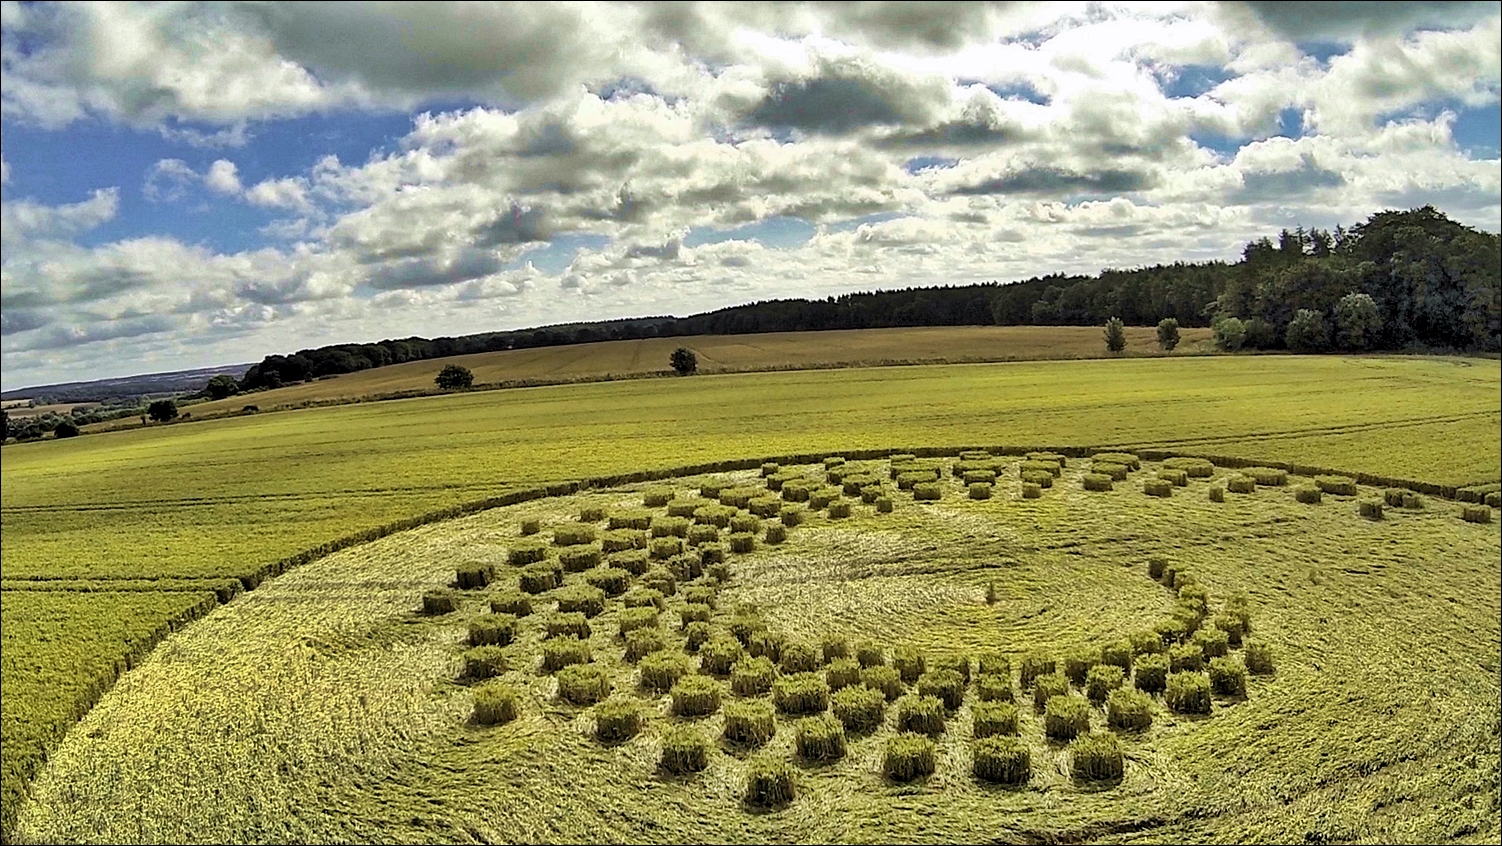 aerial_view_of_crop_circle_in_wiltshire_2014_by_mrgyrofpv-d82s9ad